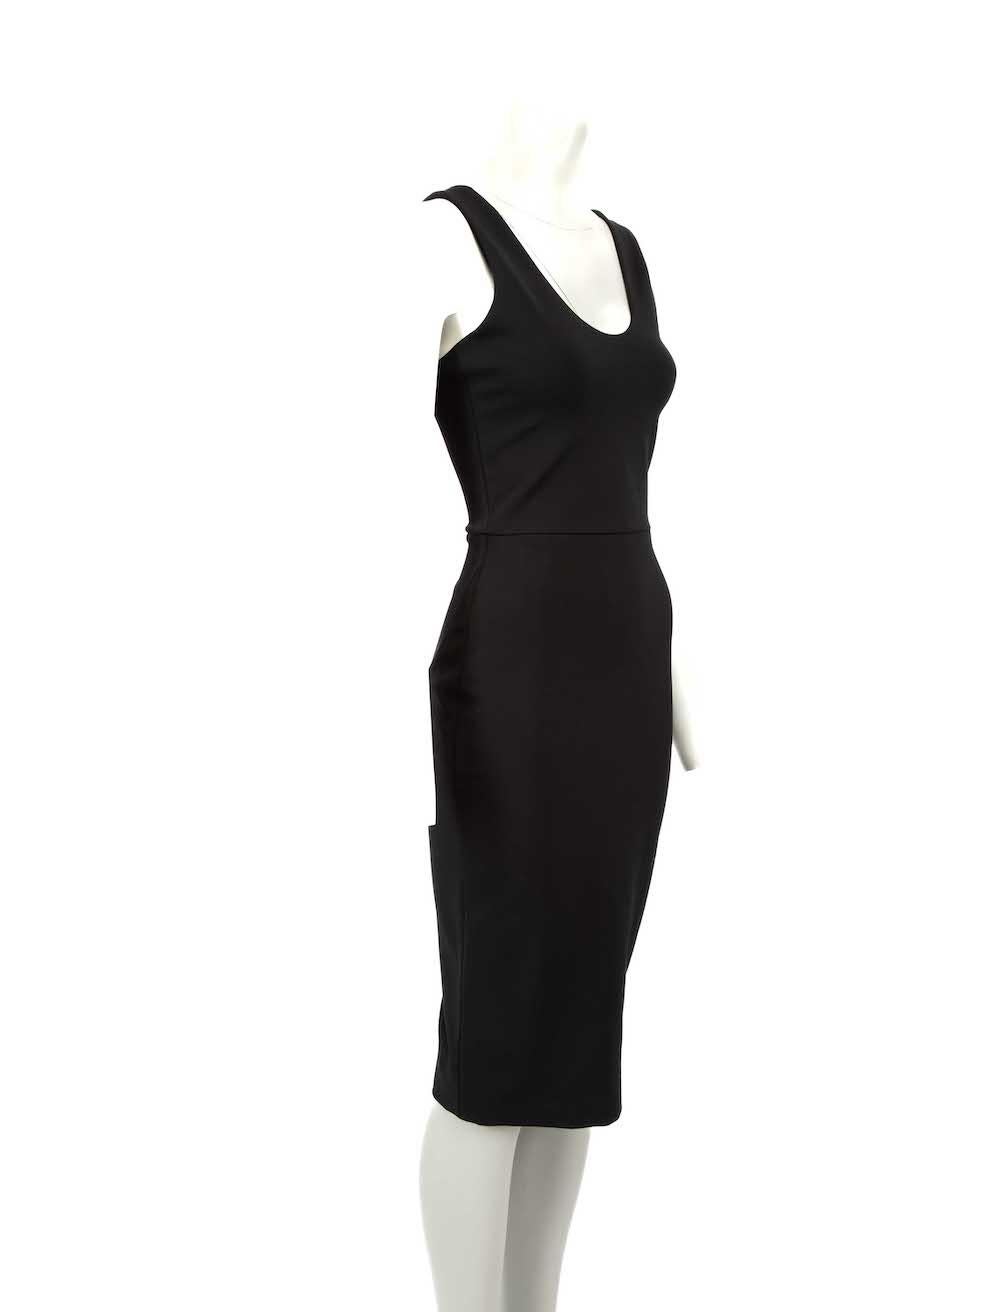 CONDITION is Very good. Minimal wear to dress is evident. Minimal wear to the dress lining with light pilling to the texture on this used Victoria Beckham designer resale item.
 
 Details
 Black
 Viscose
 Bodycon dress
 Knee length
 Stretchy
 Scoop